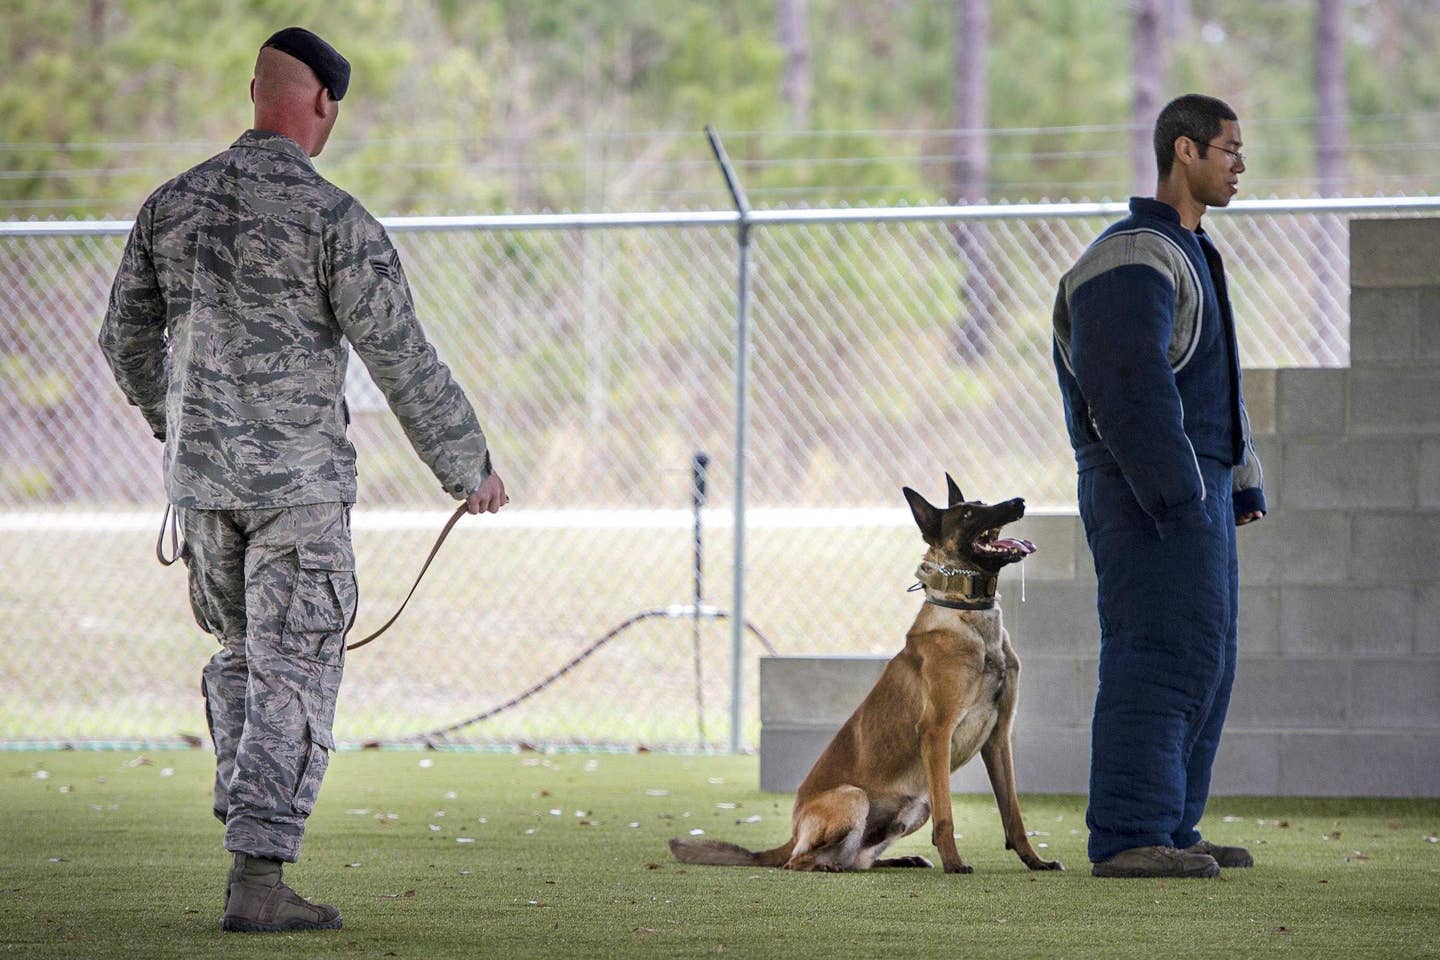 Air Force Senior Airman Anthony Hayes, left, commands Ttoby, a military working dog, to stand down during a demonstration at Moody Air Force Base, Ga., Feb. 2, 2017. Hayes is a military dog handler assigned to the 23d Security Forces Squadron. Ttoby is a Belgian Malinois and specializes in personnel protection and detecting explosives, trained as a military dog at Joint Base San Antonio-Lackland, Texas. (Air Force photo by Tech. Sgt. Zachary Wolf)